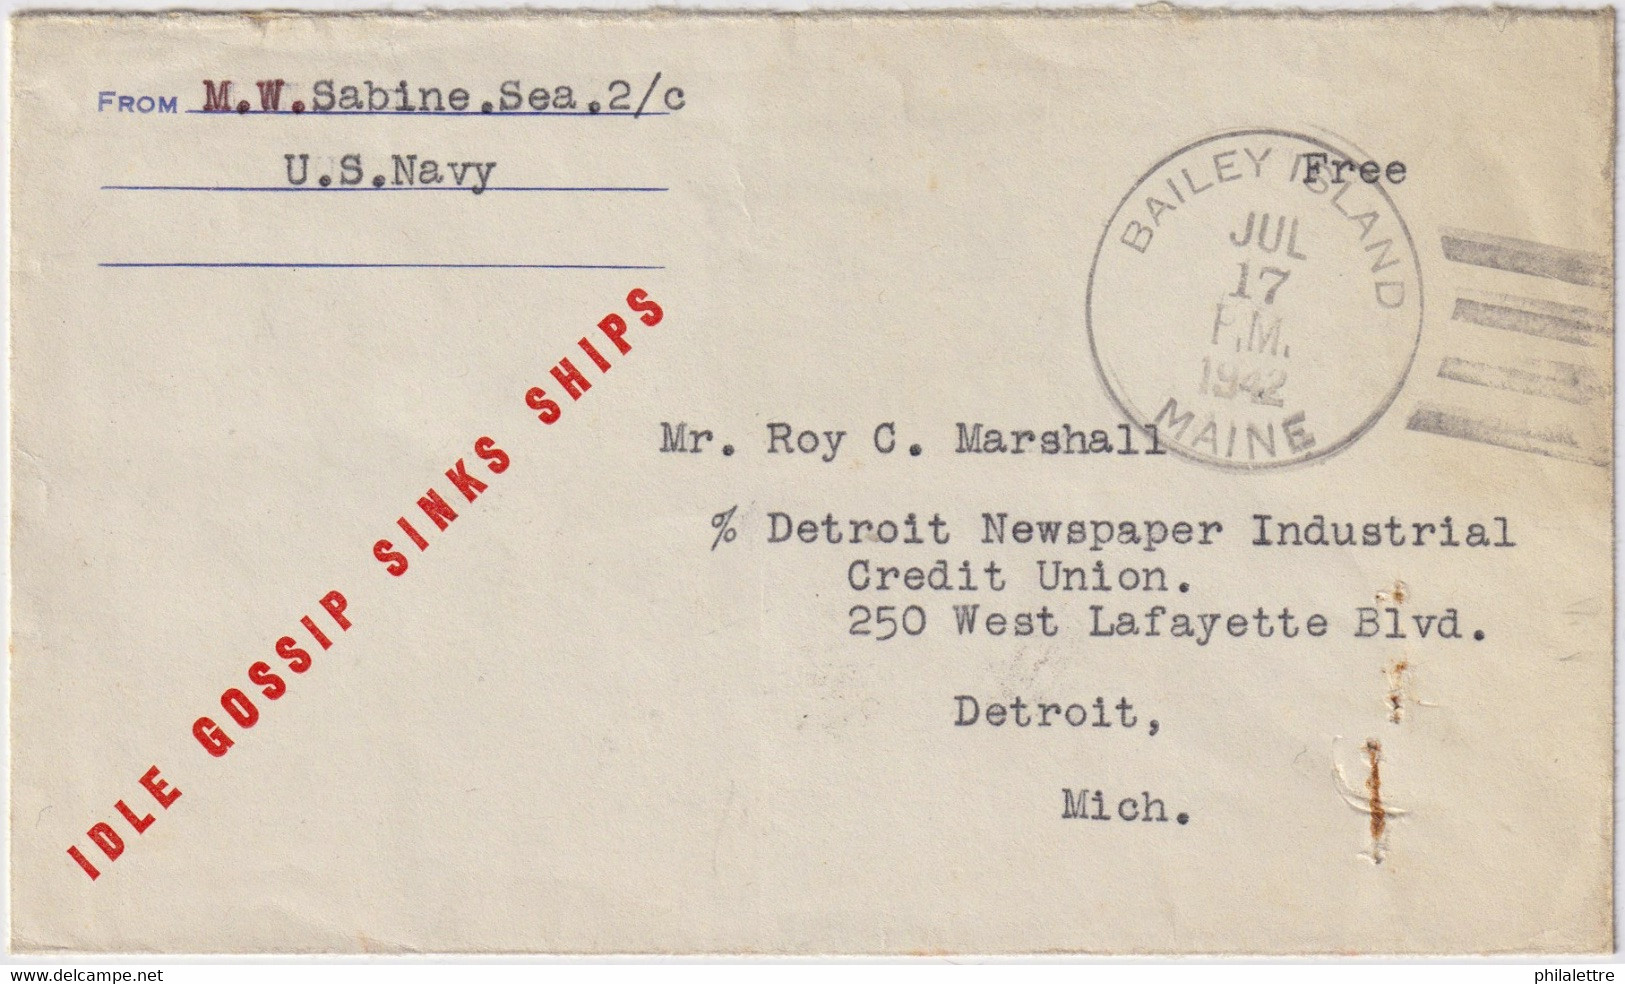 ÉTATS-UNIS / UNITED STATES - 1942 WWII NAVY Sailor's Mail Cover With "IDLE GOSSIP SINKS SHIPS" Slogan From BAILEY ISLAND - Covers & Documents